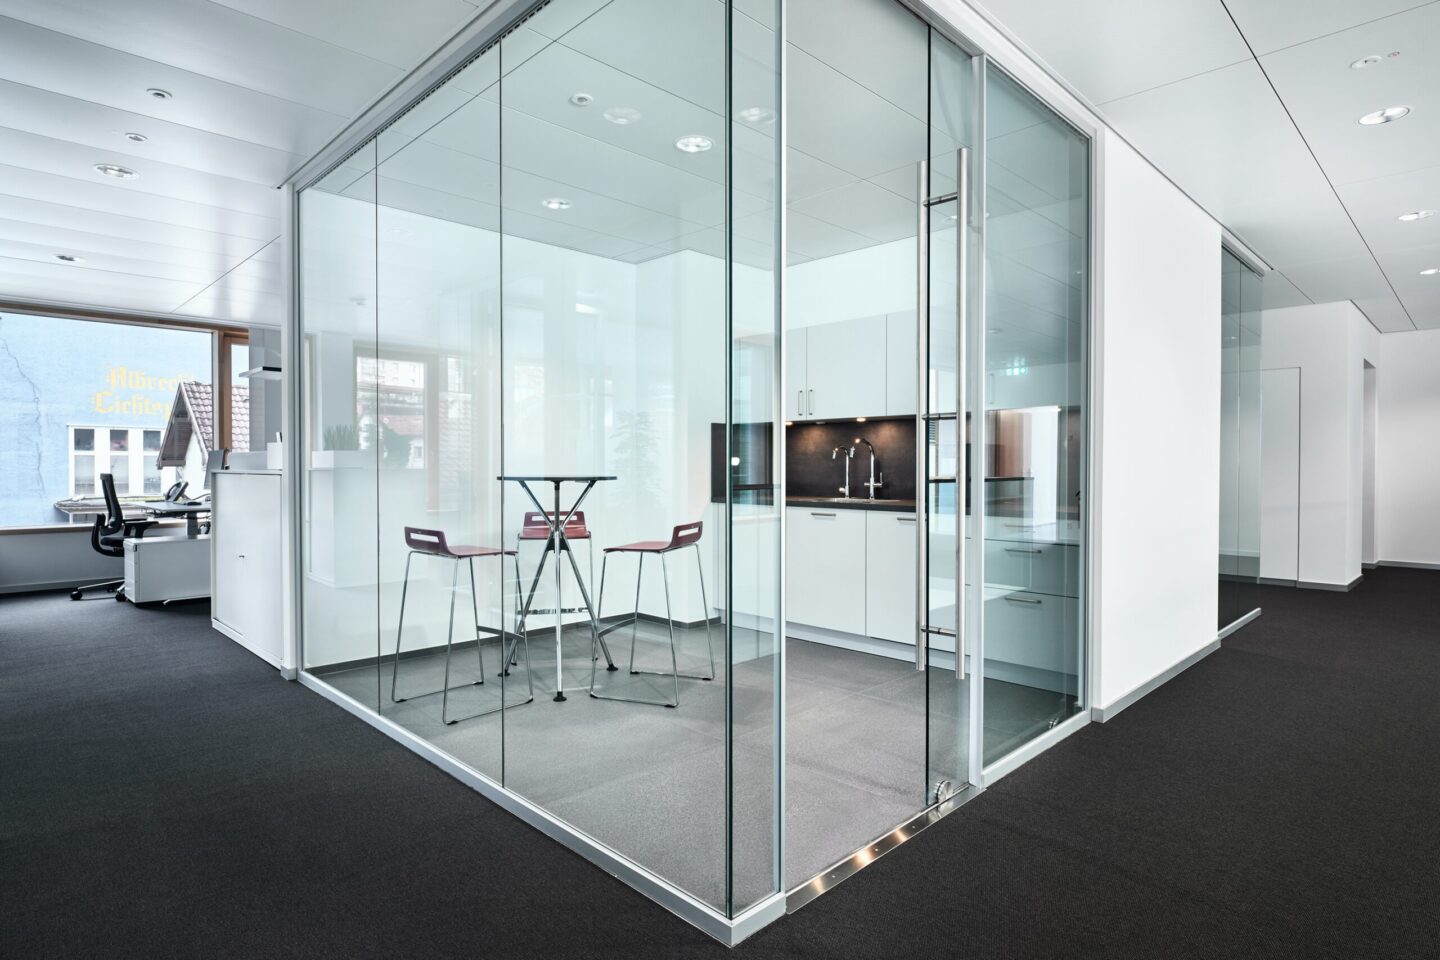 Sparkasse Hochrhein │ system walls from feco │ meeting rooms